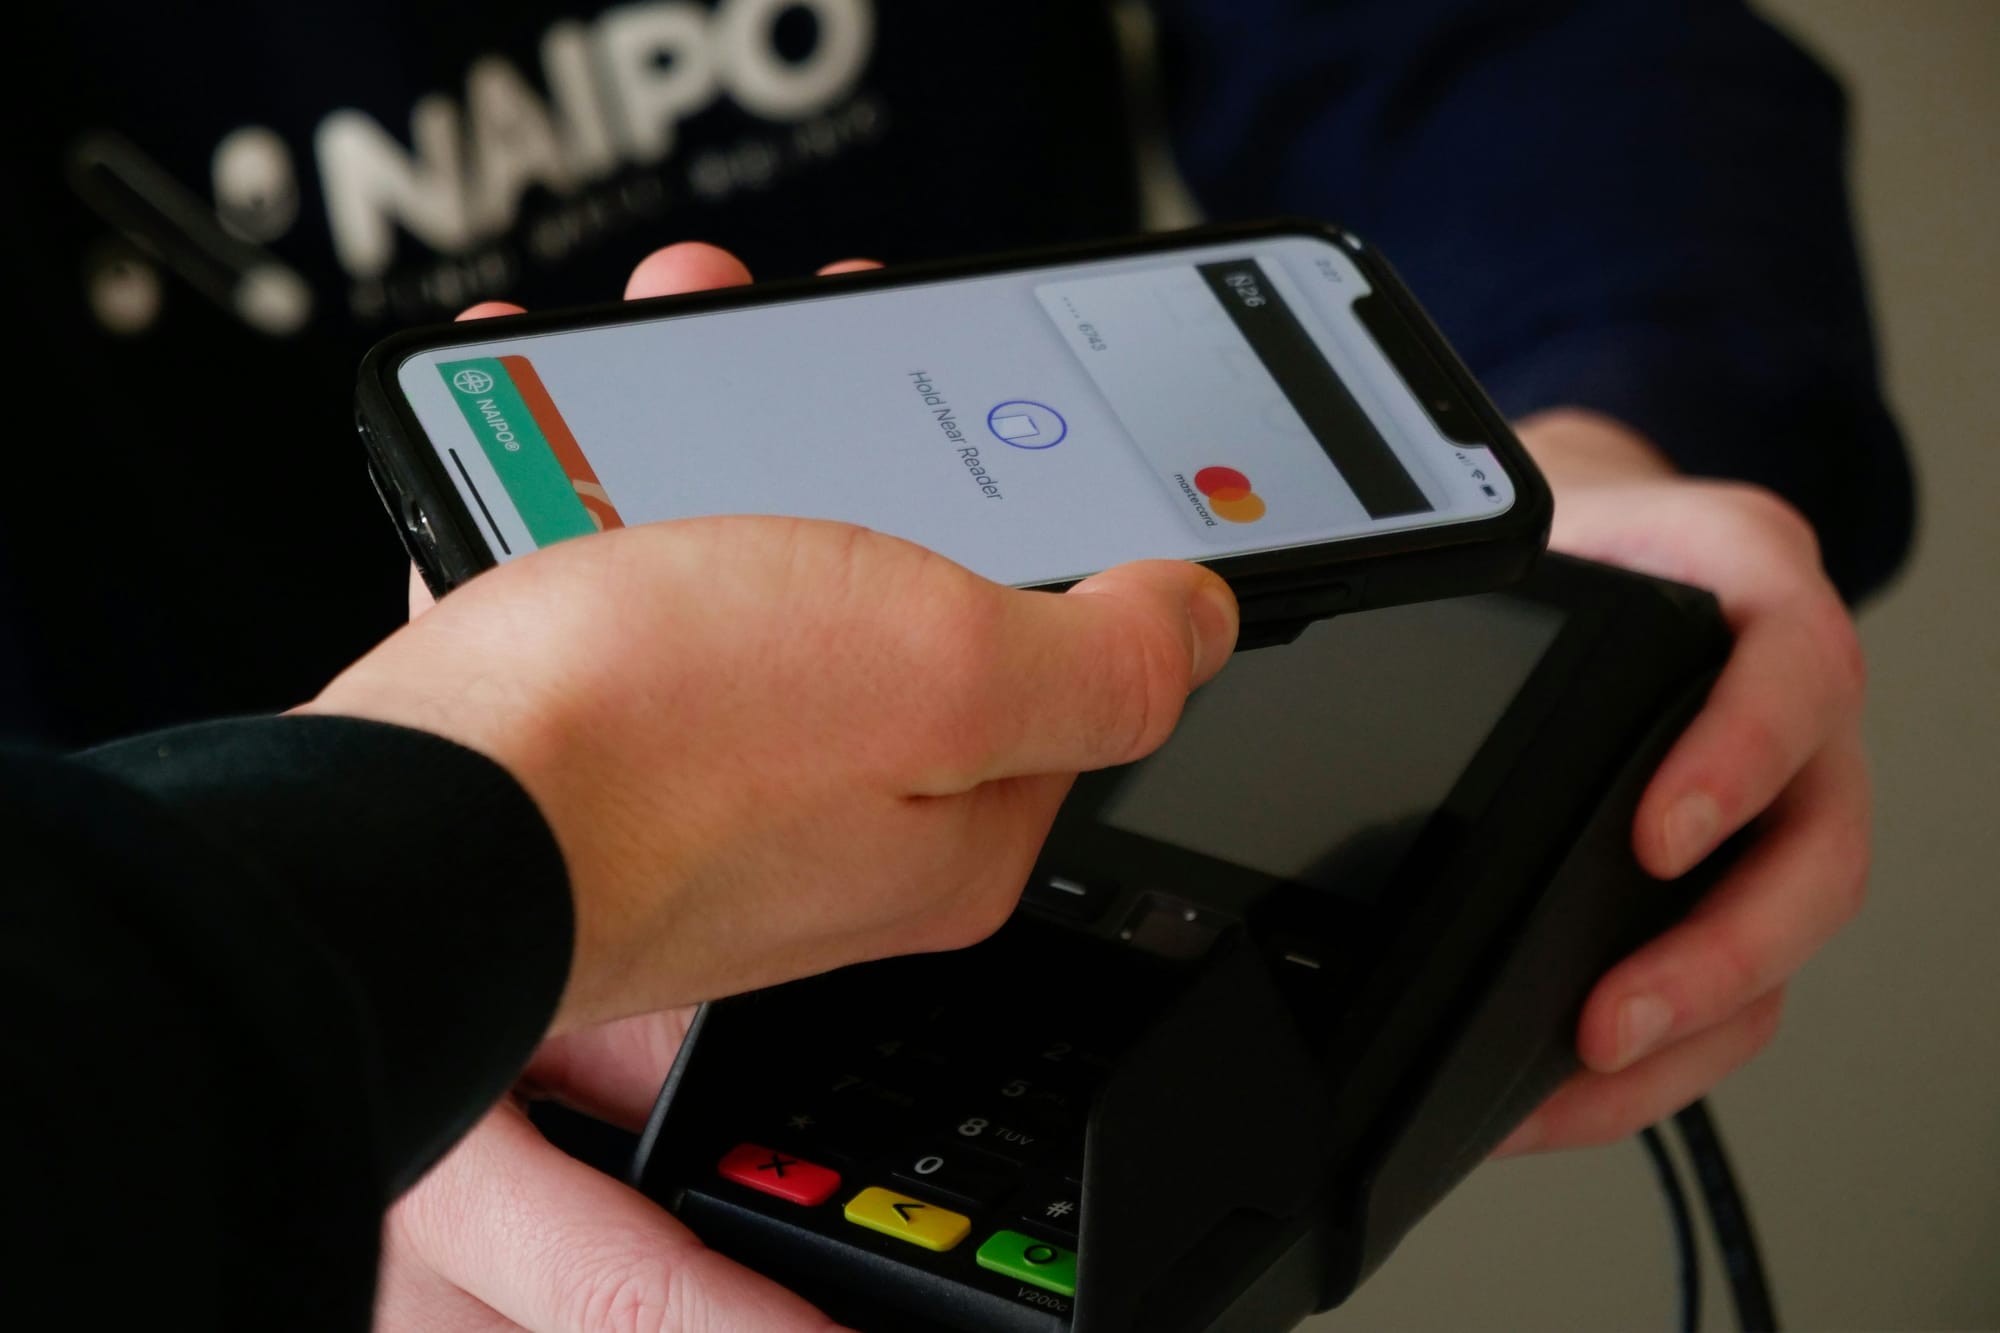 Under The Hood of Apple Pay